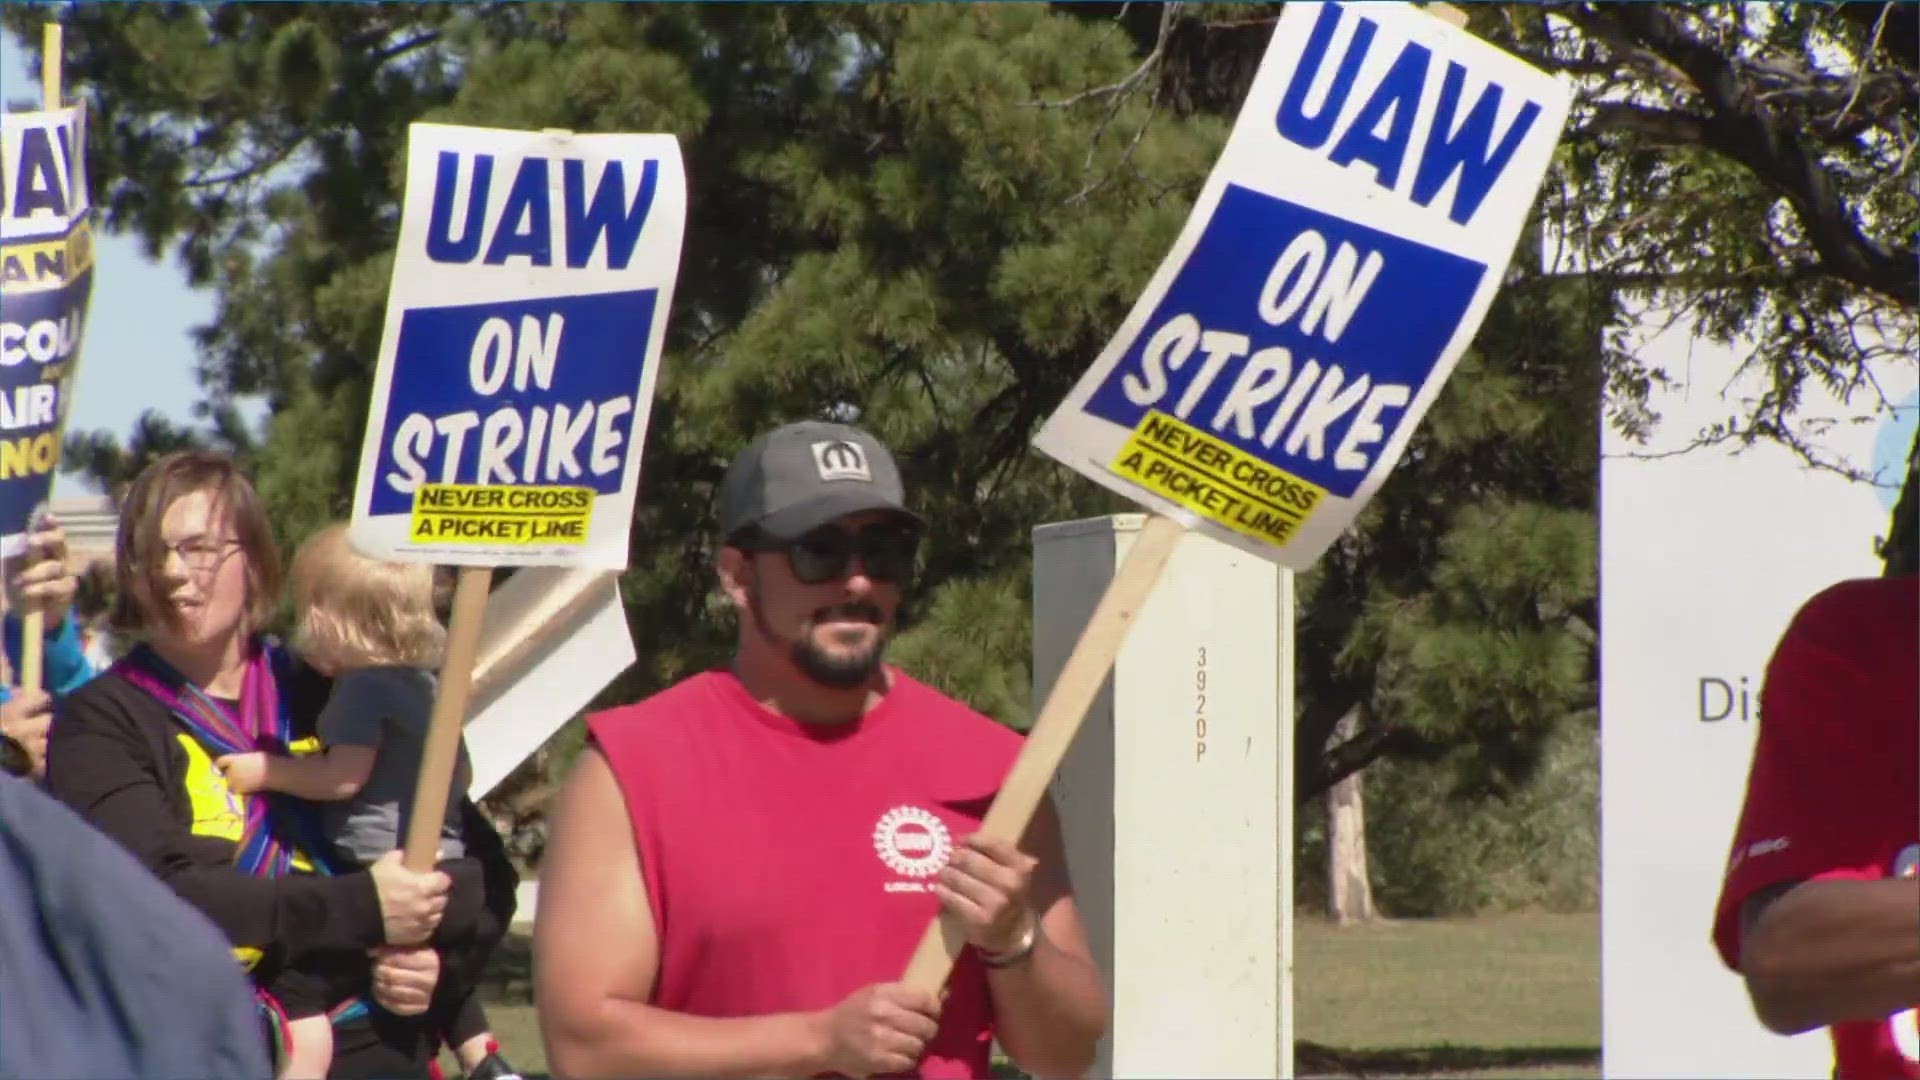 UAW members are now striking in 20 states.